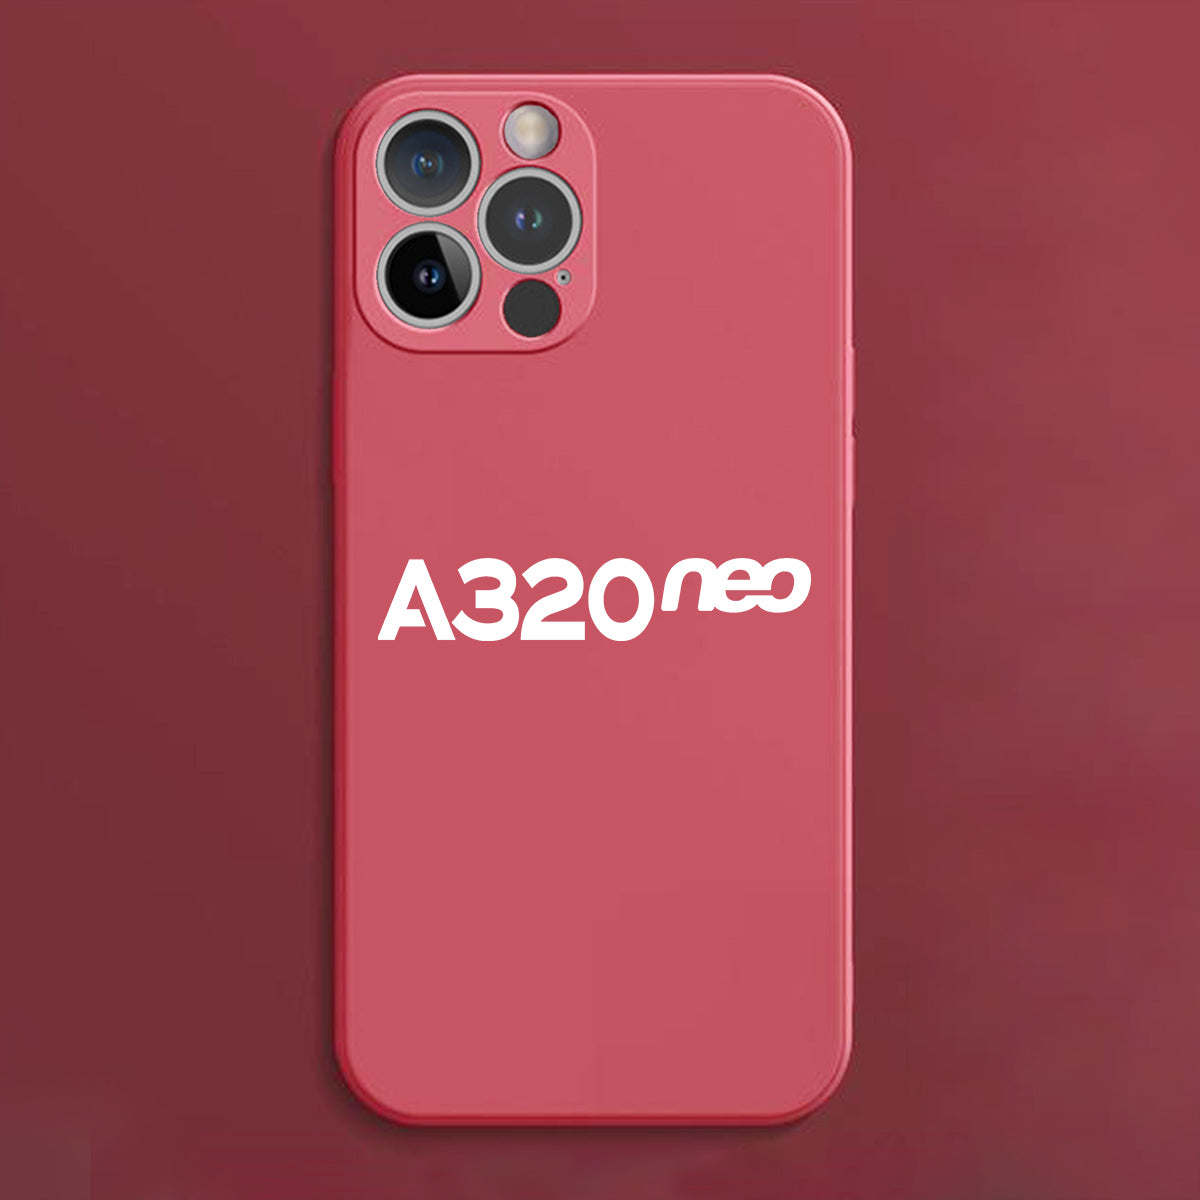 A320neo & Text Designed Soft Silicone iPhone Cases